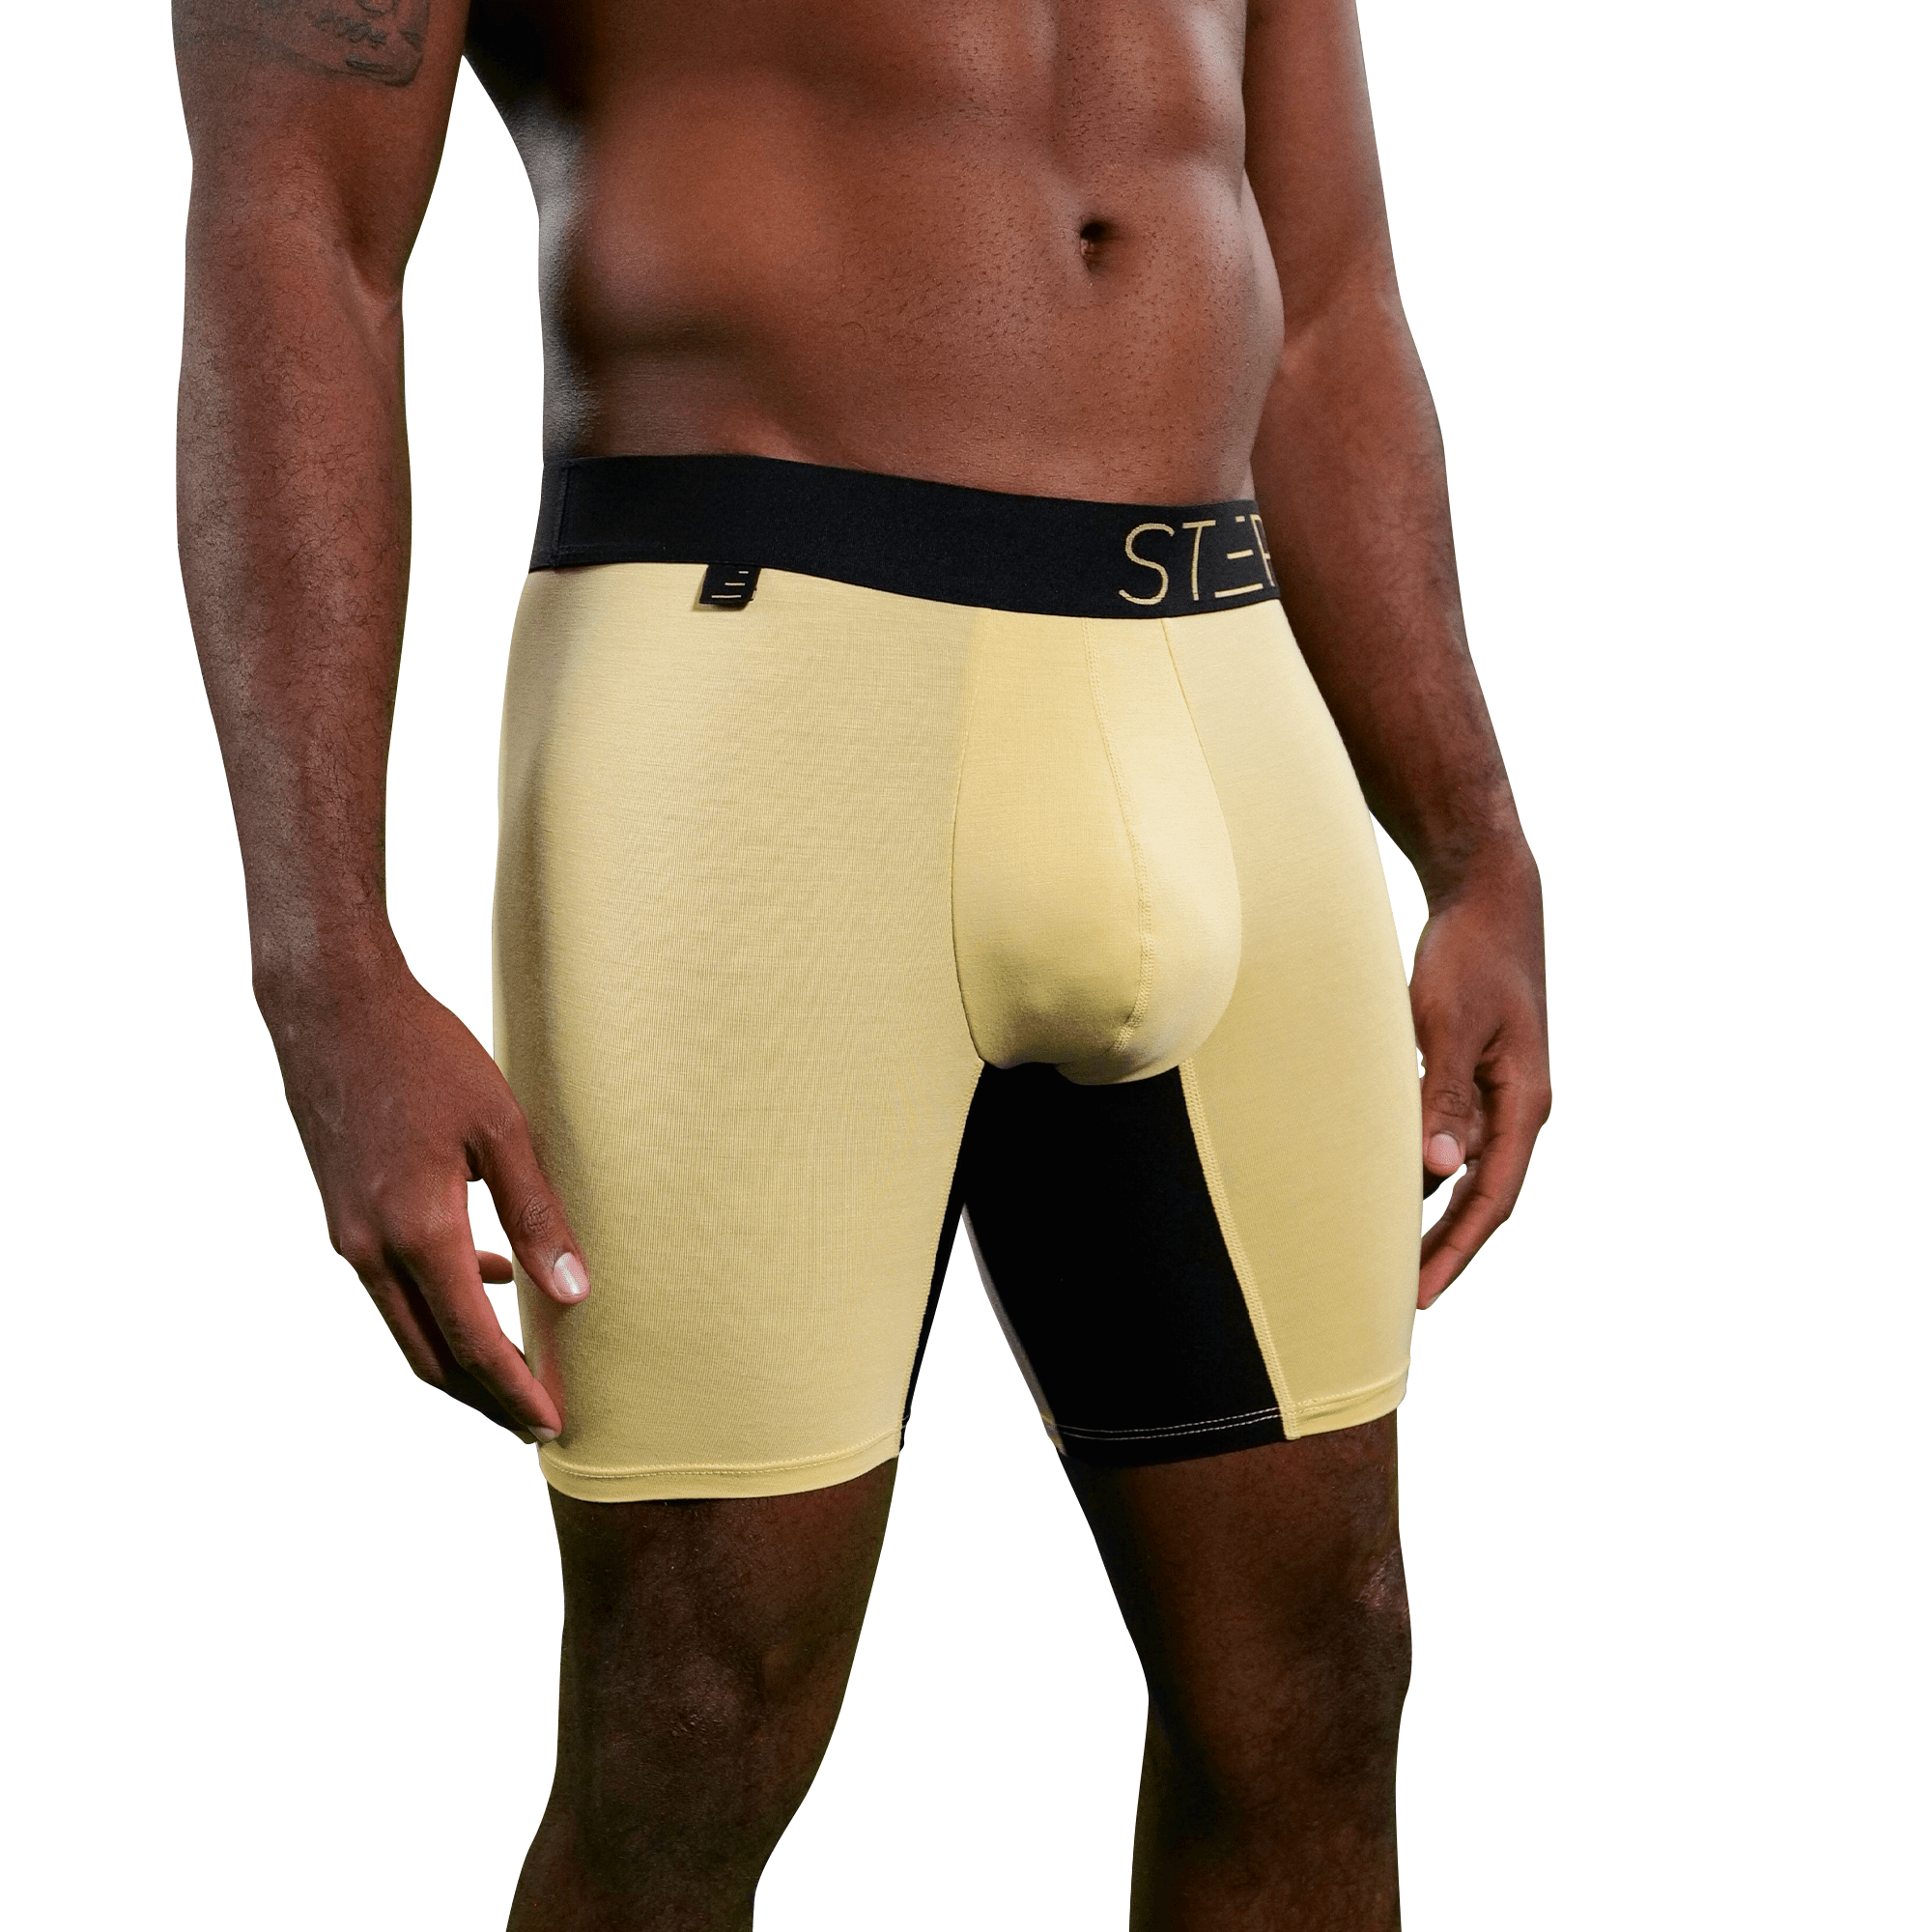 Boxer Brief Limited Edition Releases